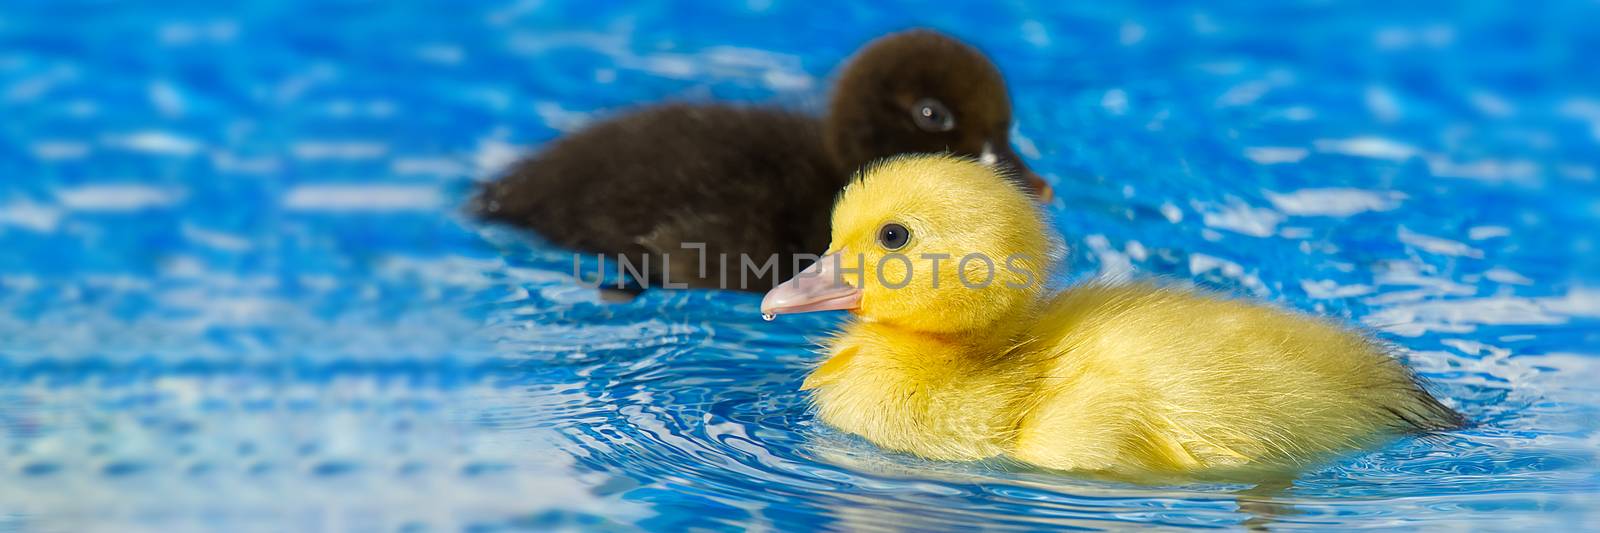 Yellow small cute duckling in swimming pool. Duckling swimming in crystal clear blue water sunny summer day. by PhotoTime